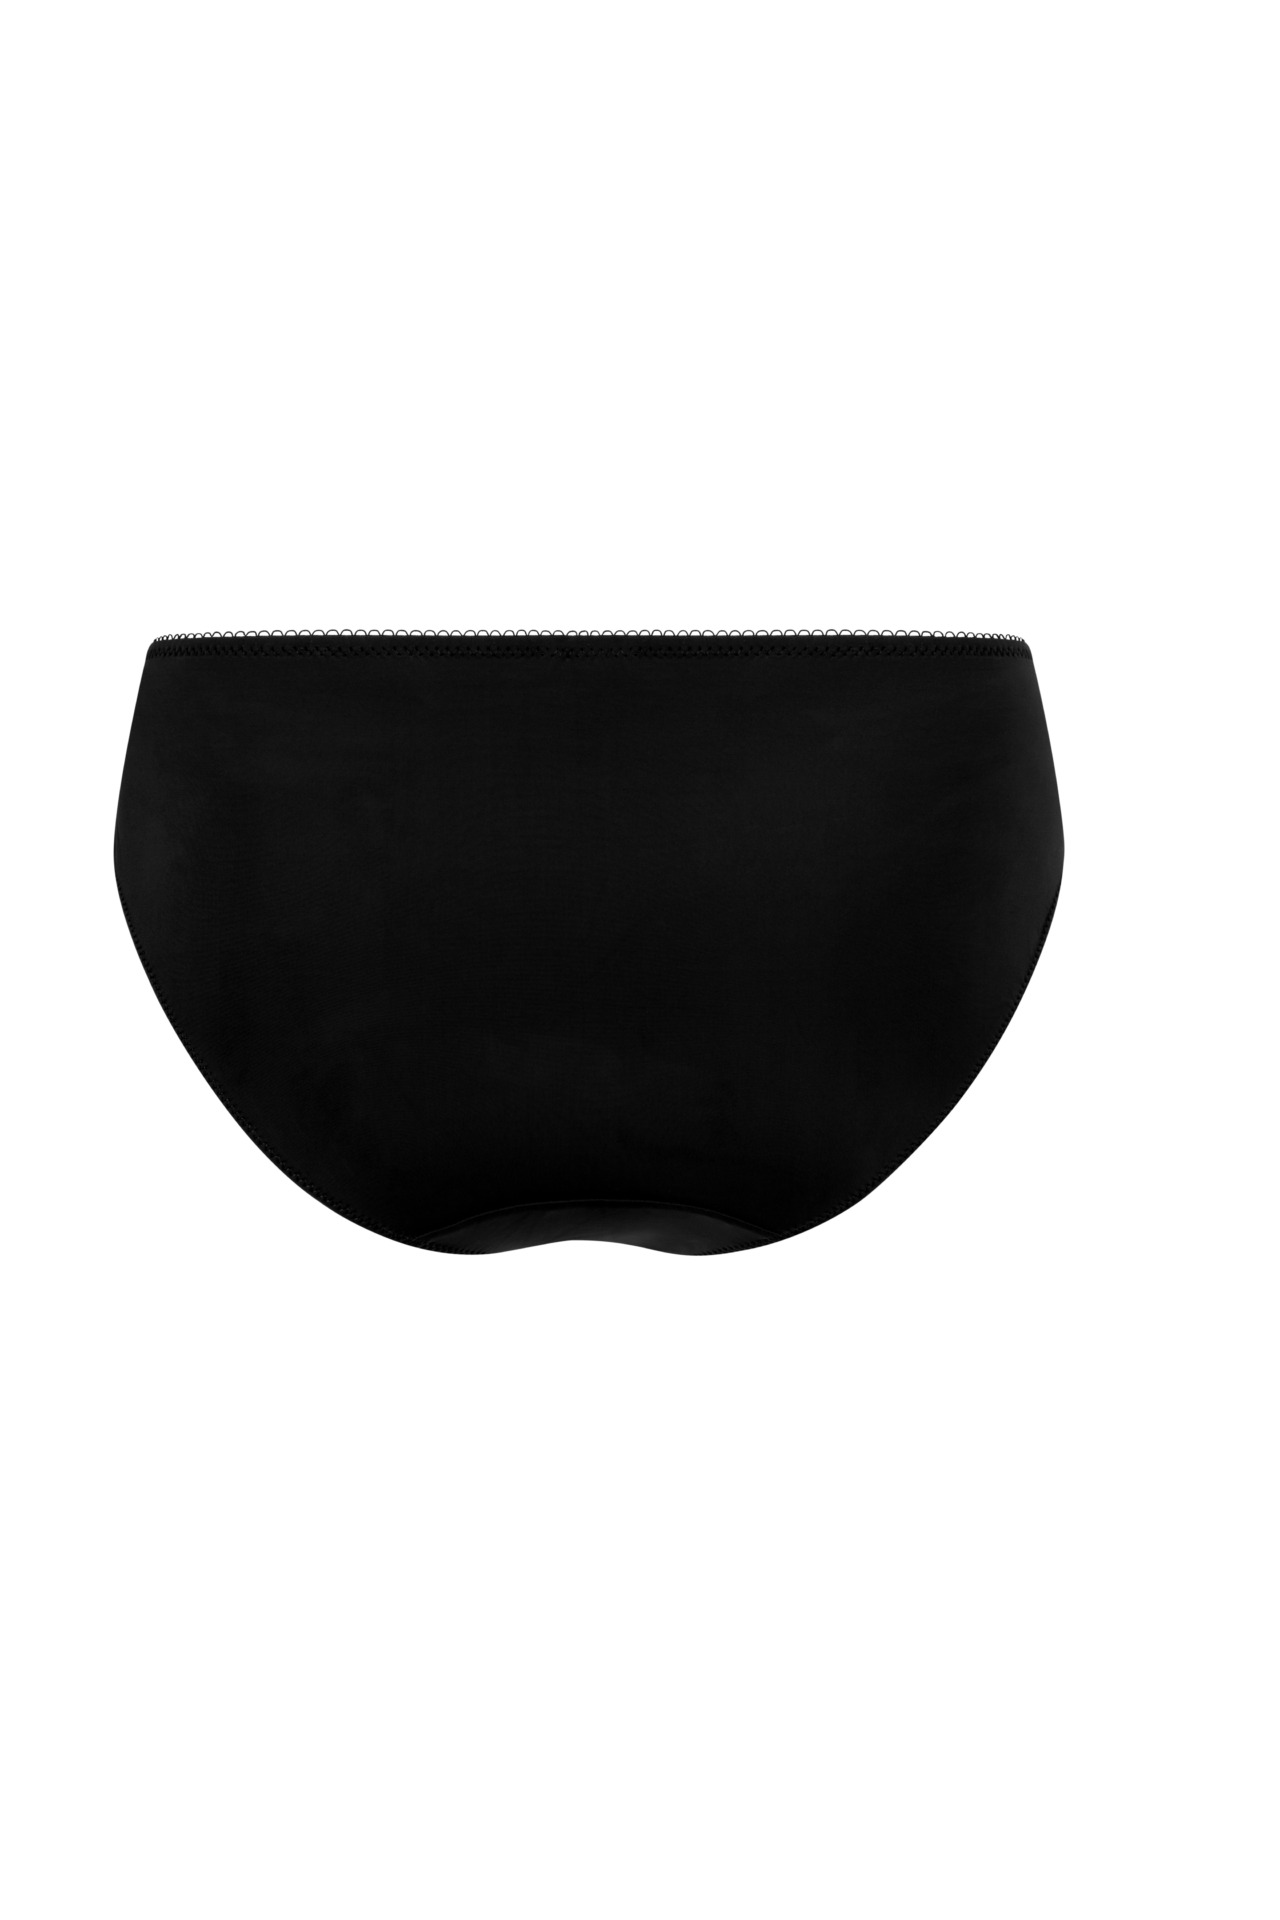 SPECIAL COLLECTION – Amoena Kyra Panties - Solution Capilaire Select